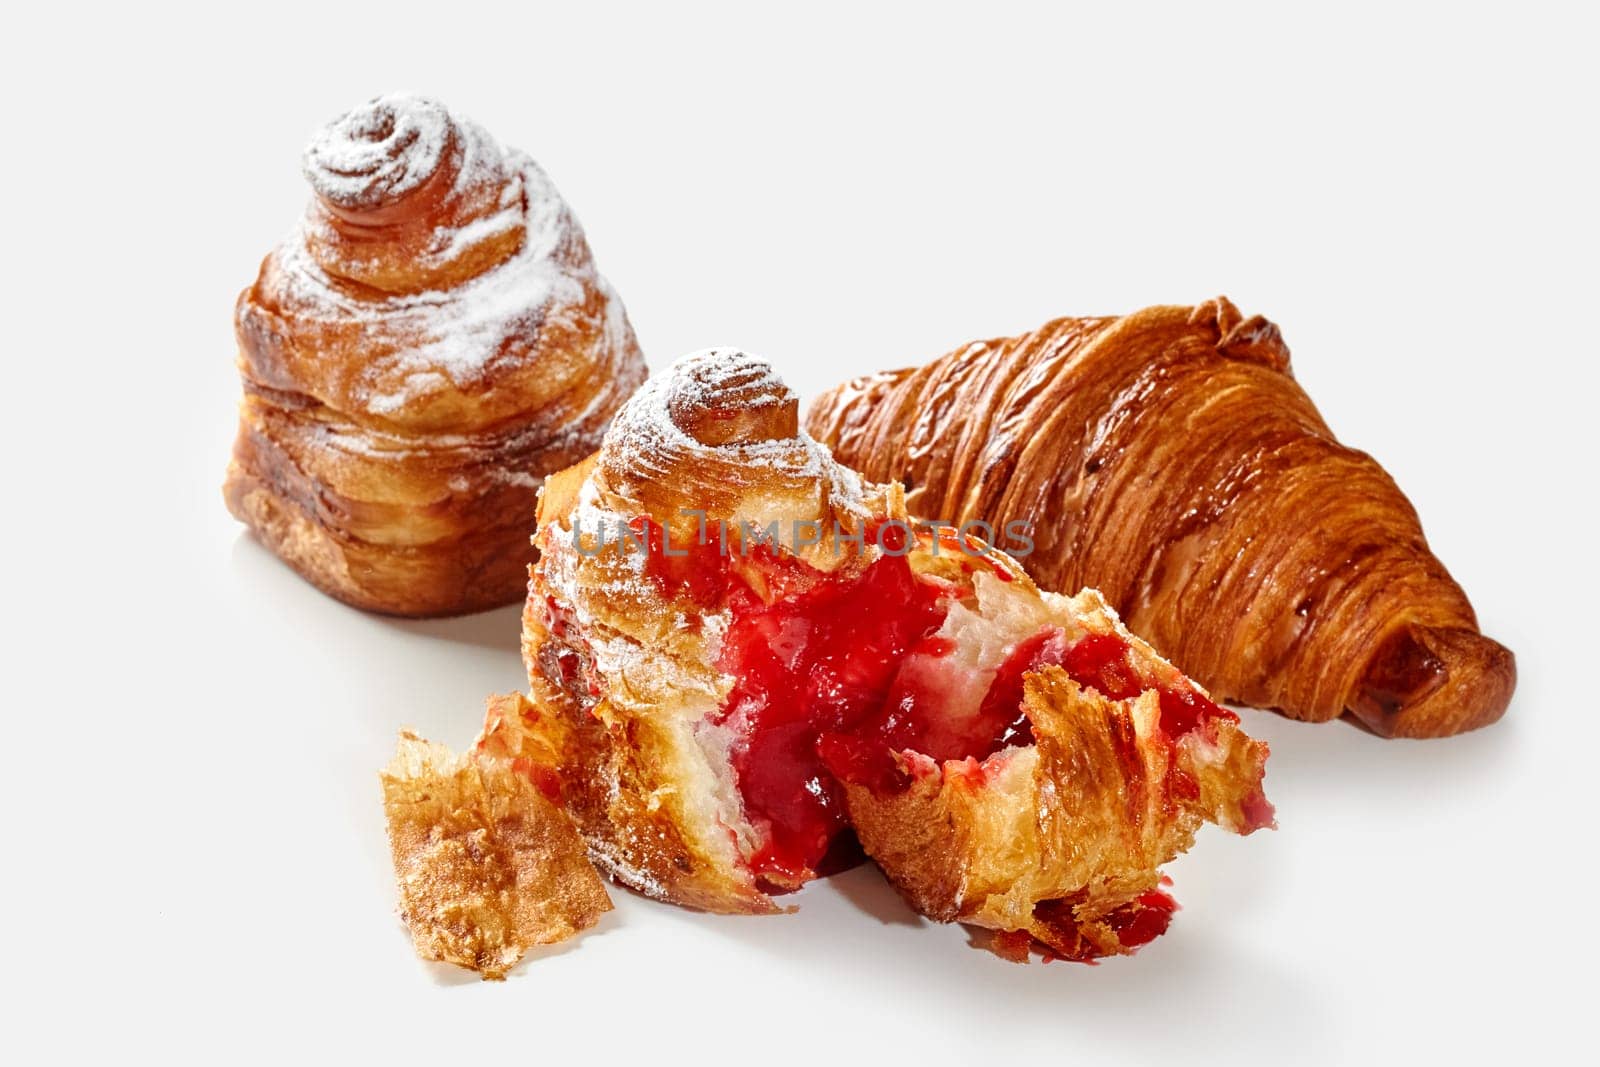 Delightful golden flaky croissant and cube shaped cruffins, dusted with powdered sugar with sweet berry jam filling on white background. Sweet French style pastries